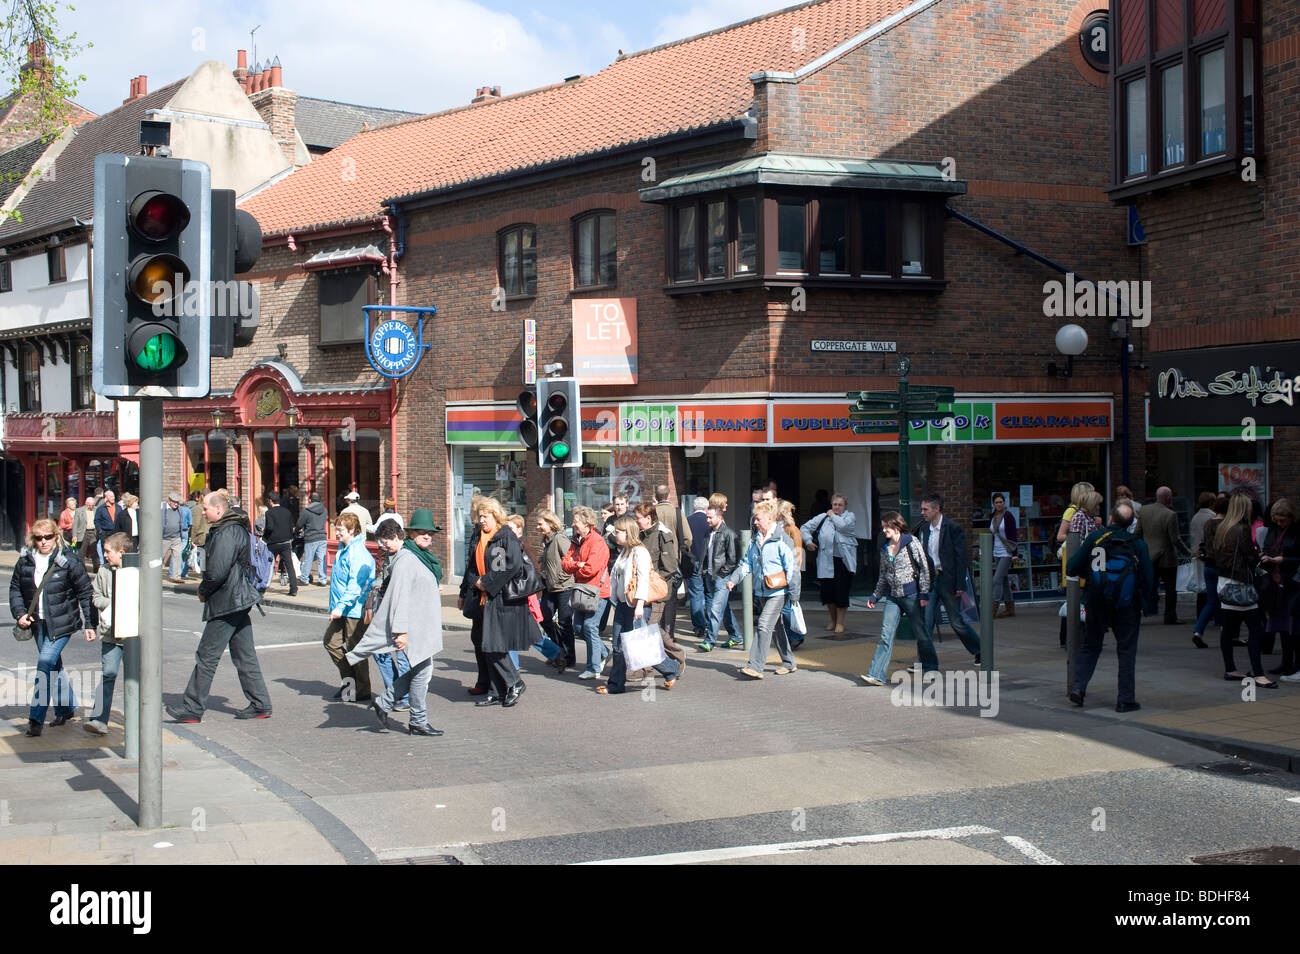 Pedestrians crossing the road at traffic lights in York city centre, England Stock Photo